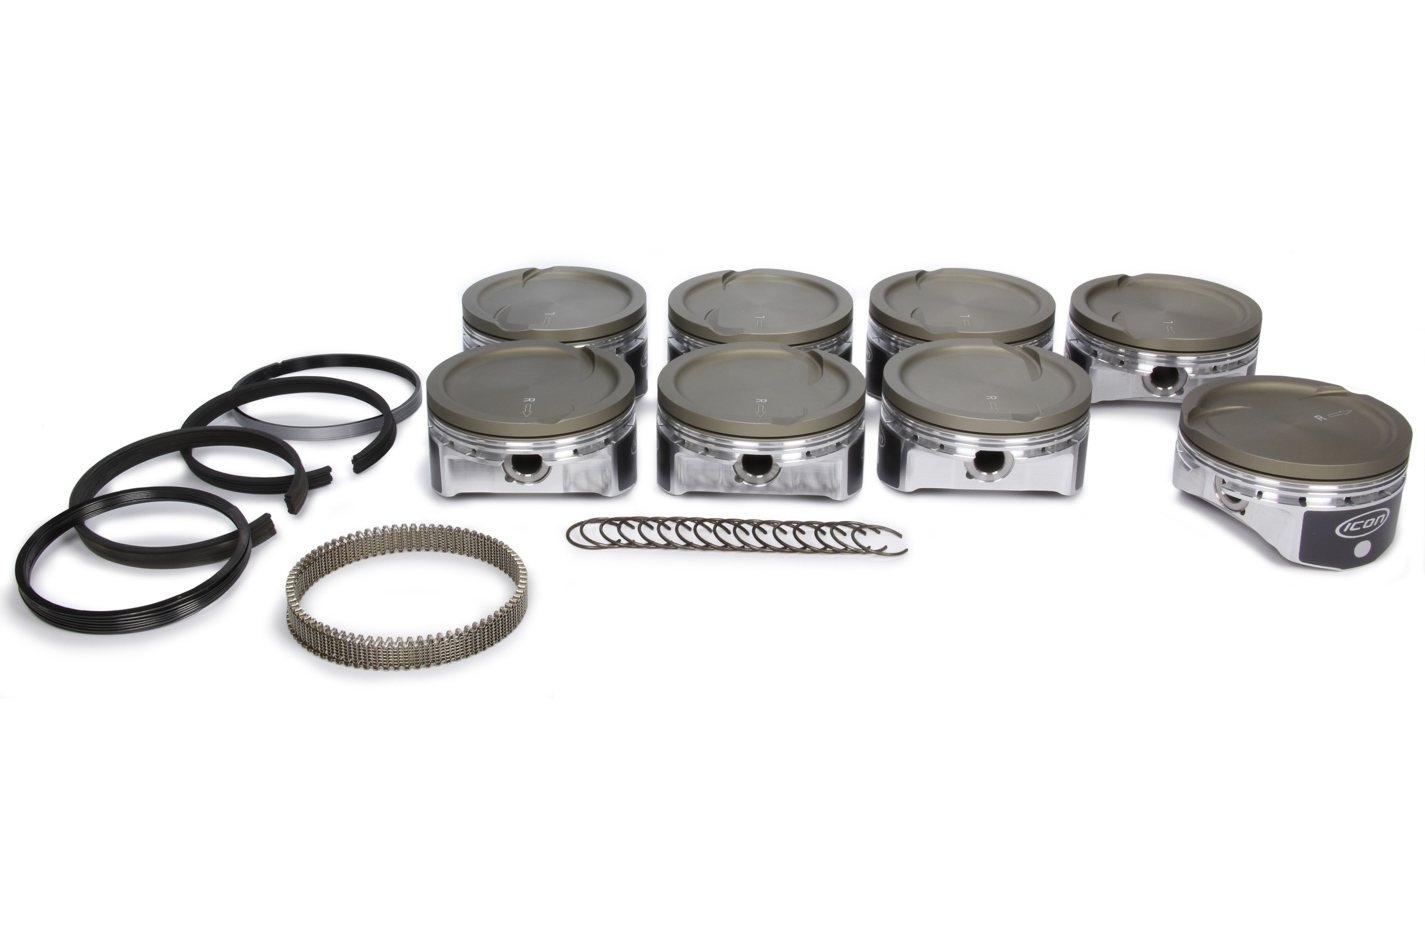 Icon Pistons IC532CAKTS.005 Piston and Ring, Premium Forged, Forged, 4.005 in Bore, 1.2 x 1.2 x 3.0 mm Ring Groove, Minus 20.00 cc, GM LS-Series, Kit